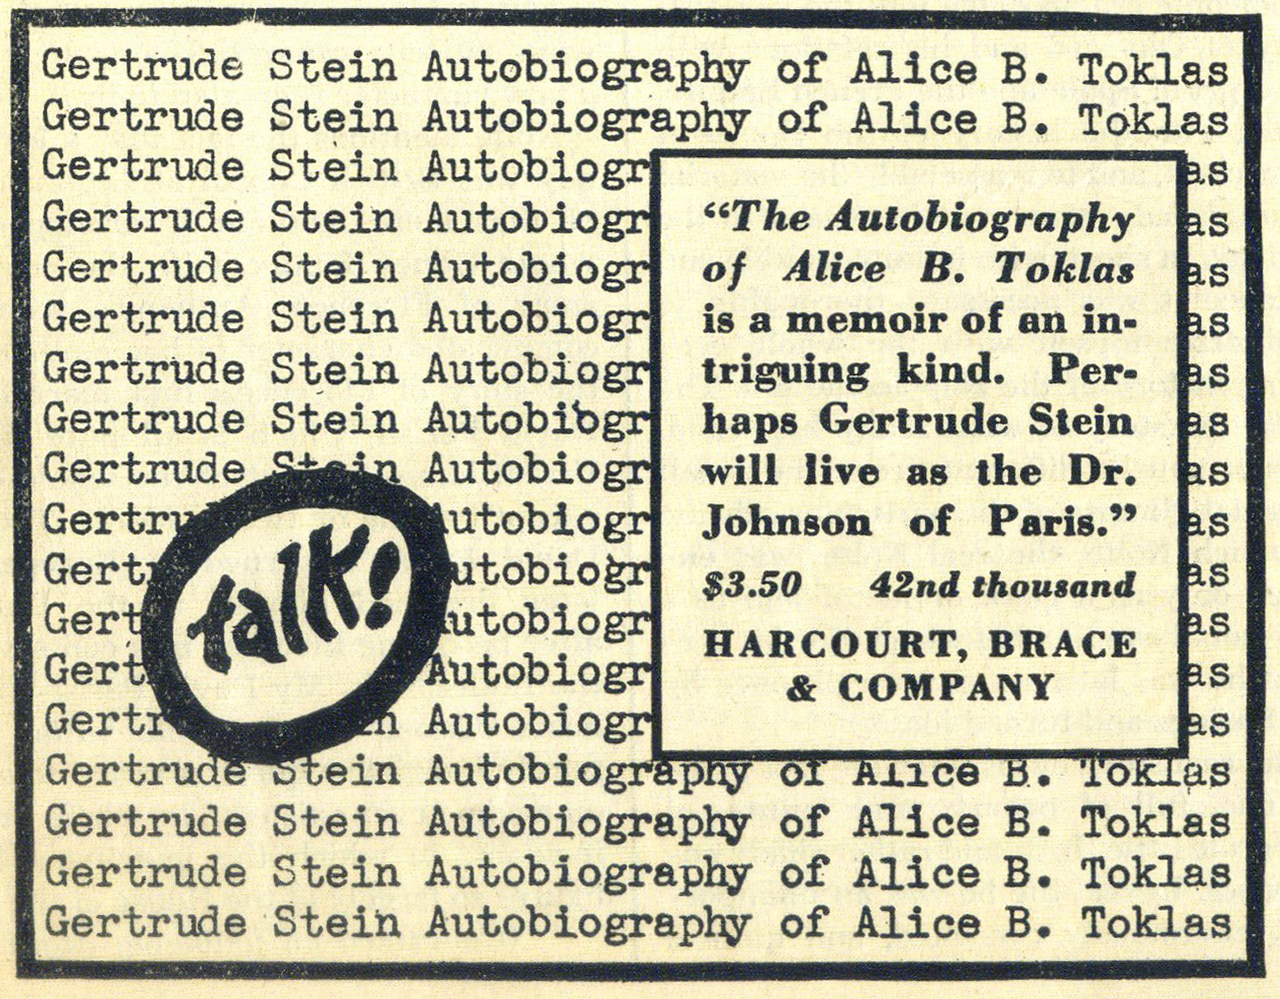 A 1934 advertisement for The Autobiography of Alice B. Toklas